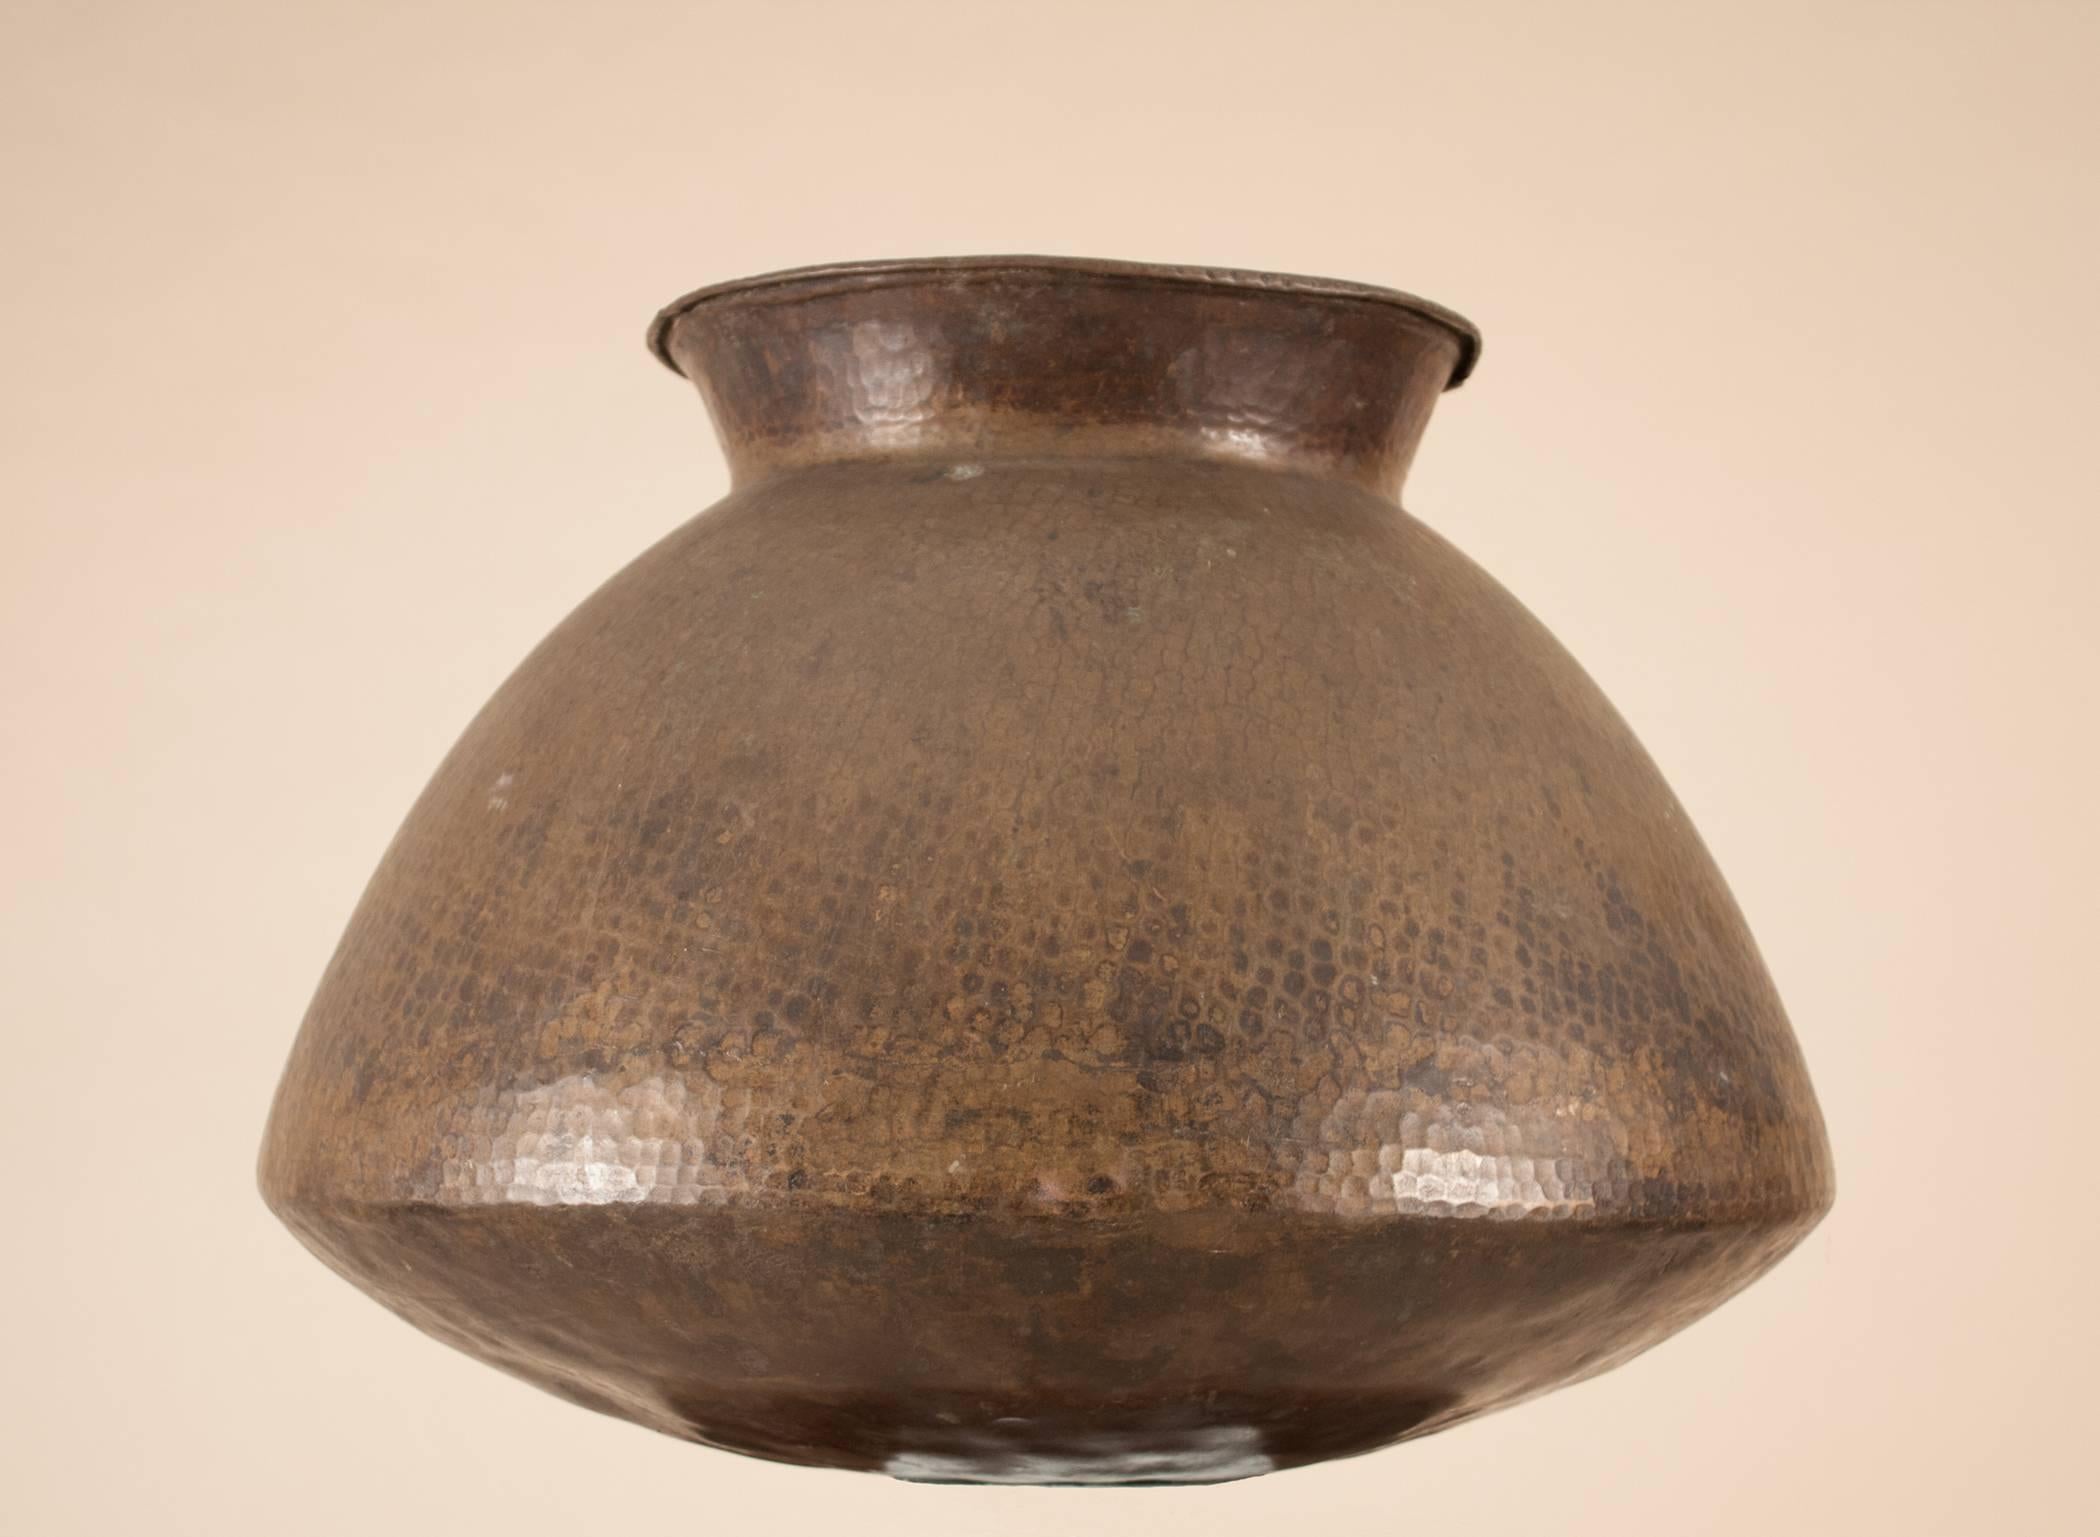 Originally used for water storage, this hand-hammered brass vessel from India has authentic texture, wonderful patina, and great form and character. The name name of the original owner is discretely inscribed on the side of the urn. The diameter at